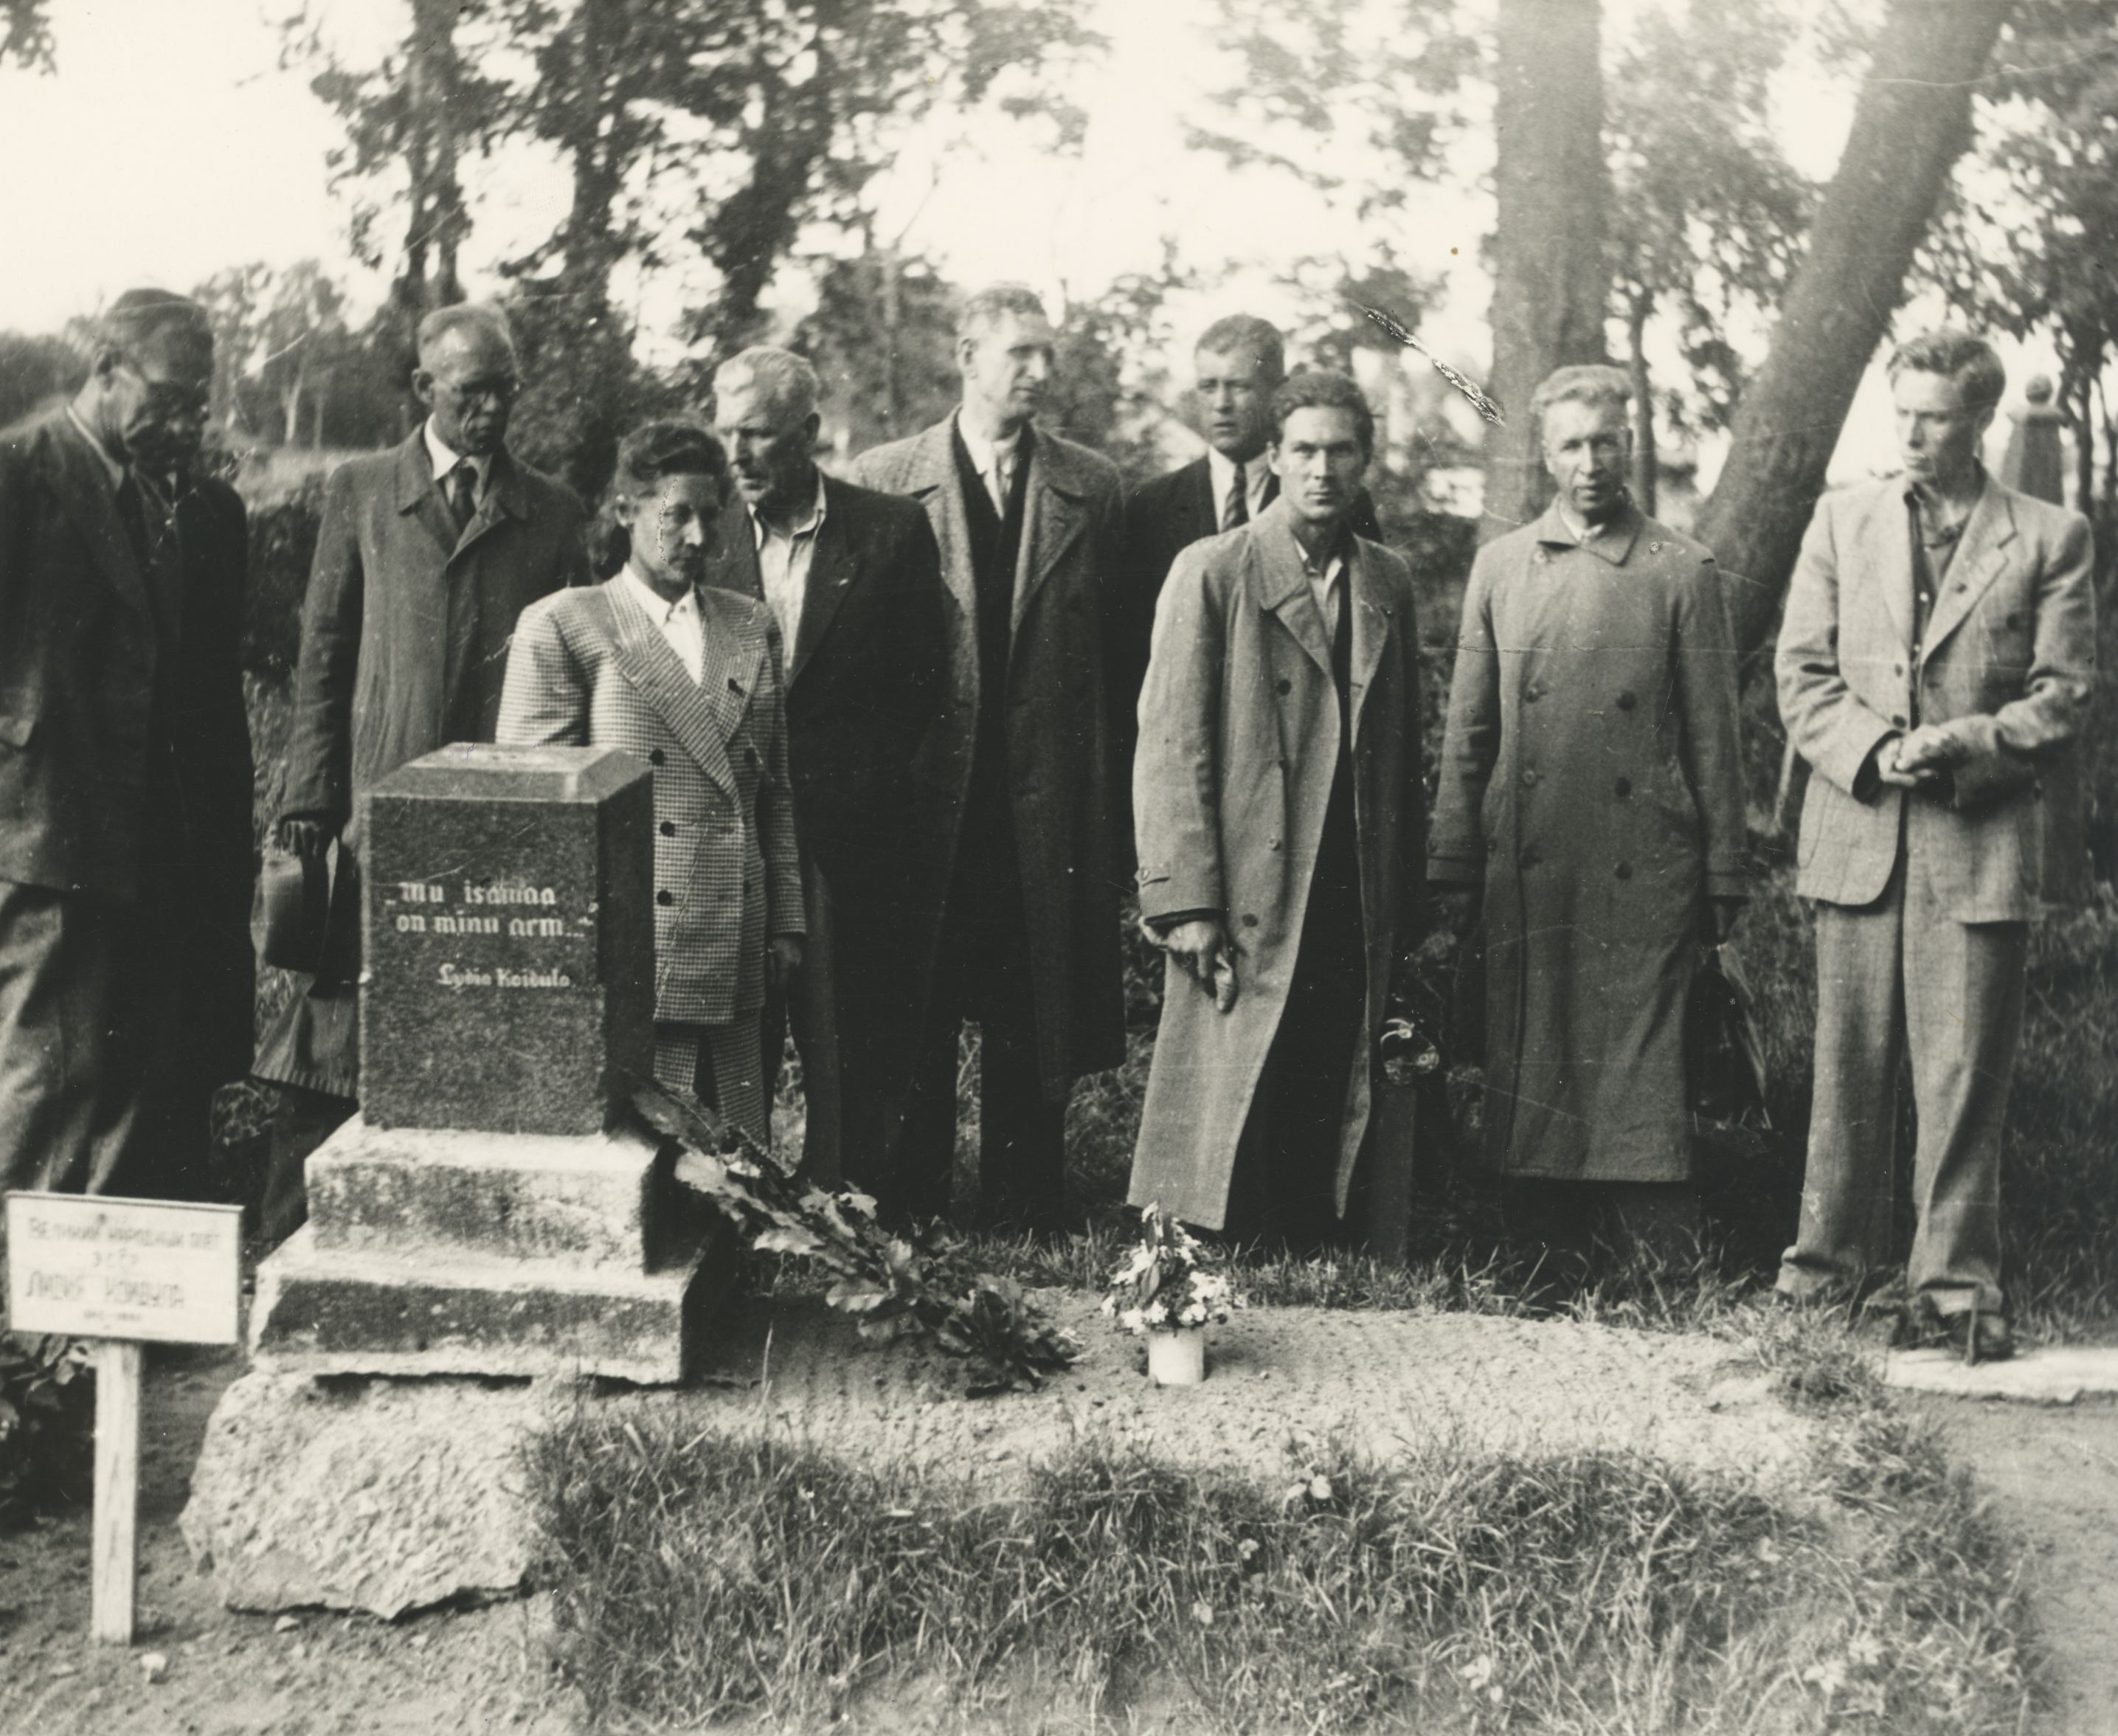 Delegation for the removal of the dust in Kroonlinna L. Koidula to the grave. VAS. : m. Raud, p. Pedusaar, J. Tellman, a. Lauter, o. Riss, h. Pess, e. Okas, dr. Pross, J. Schmuul